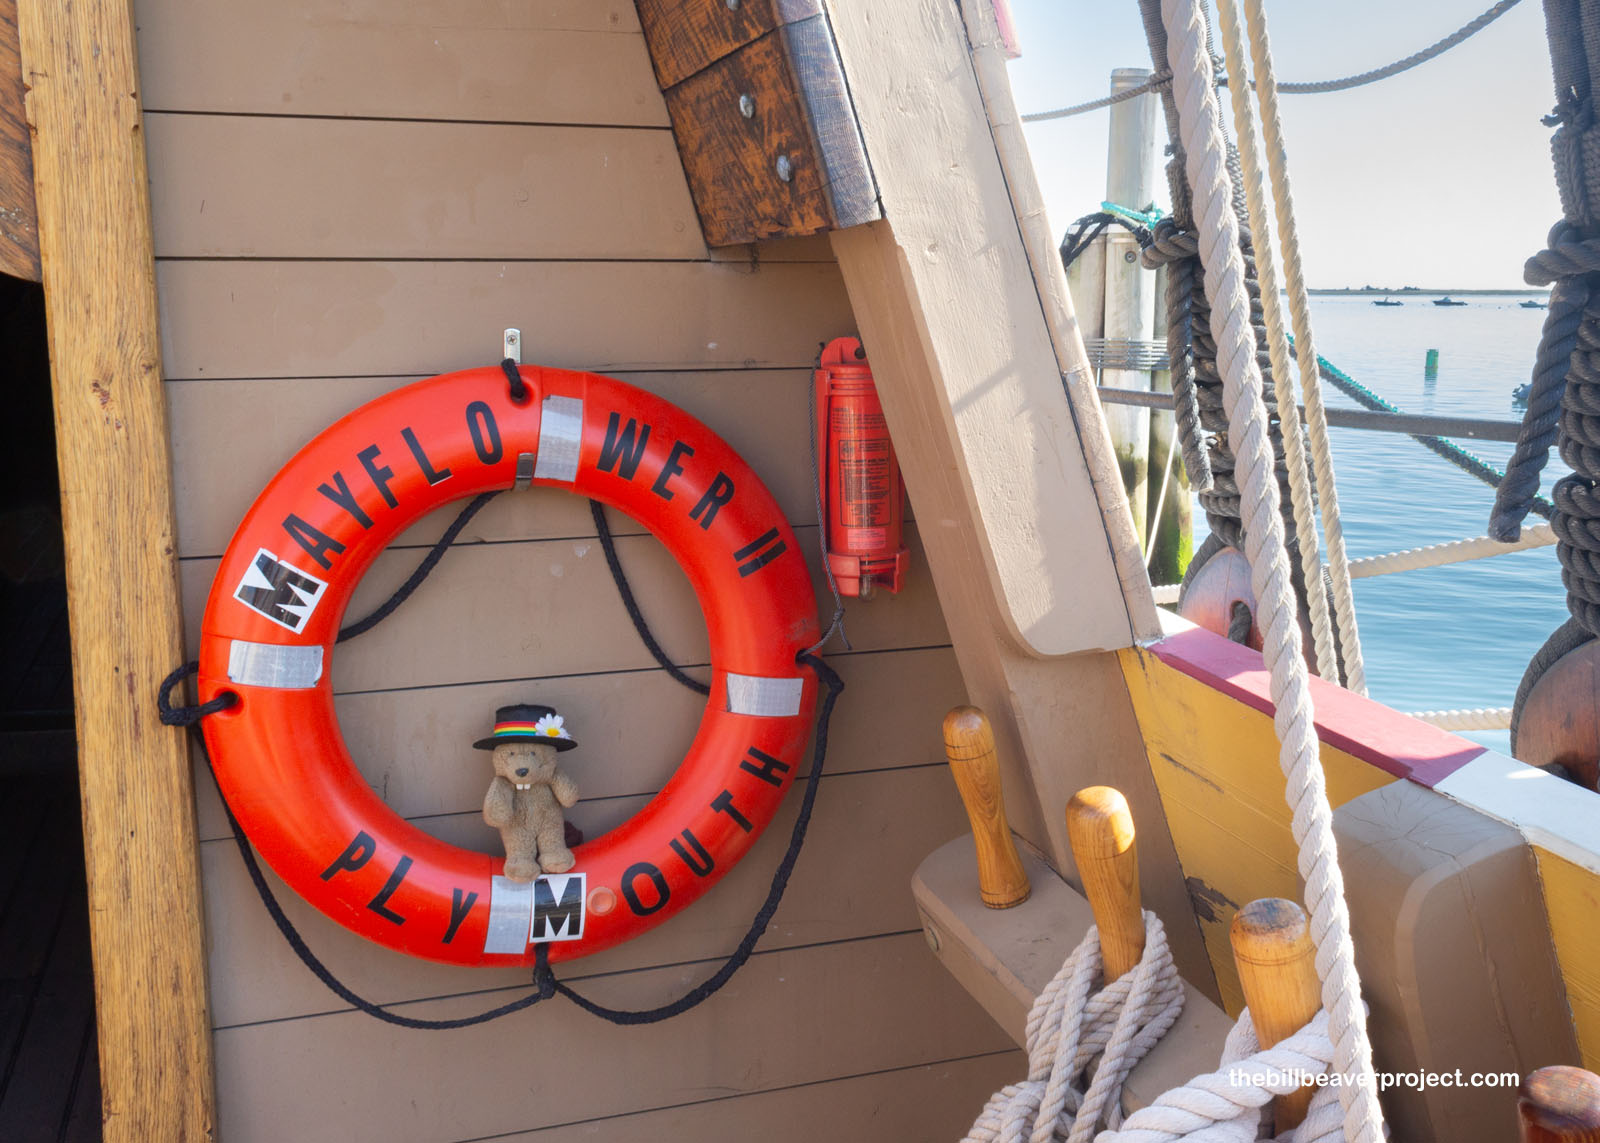 Safety first aboard this floating museum!